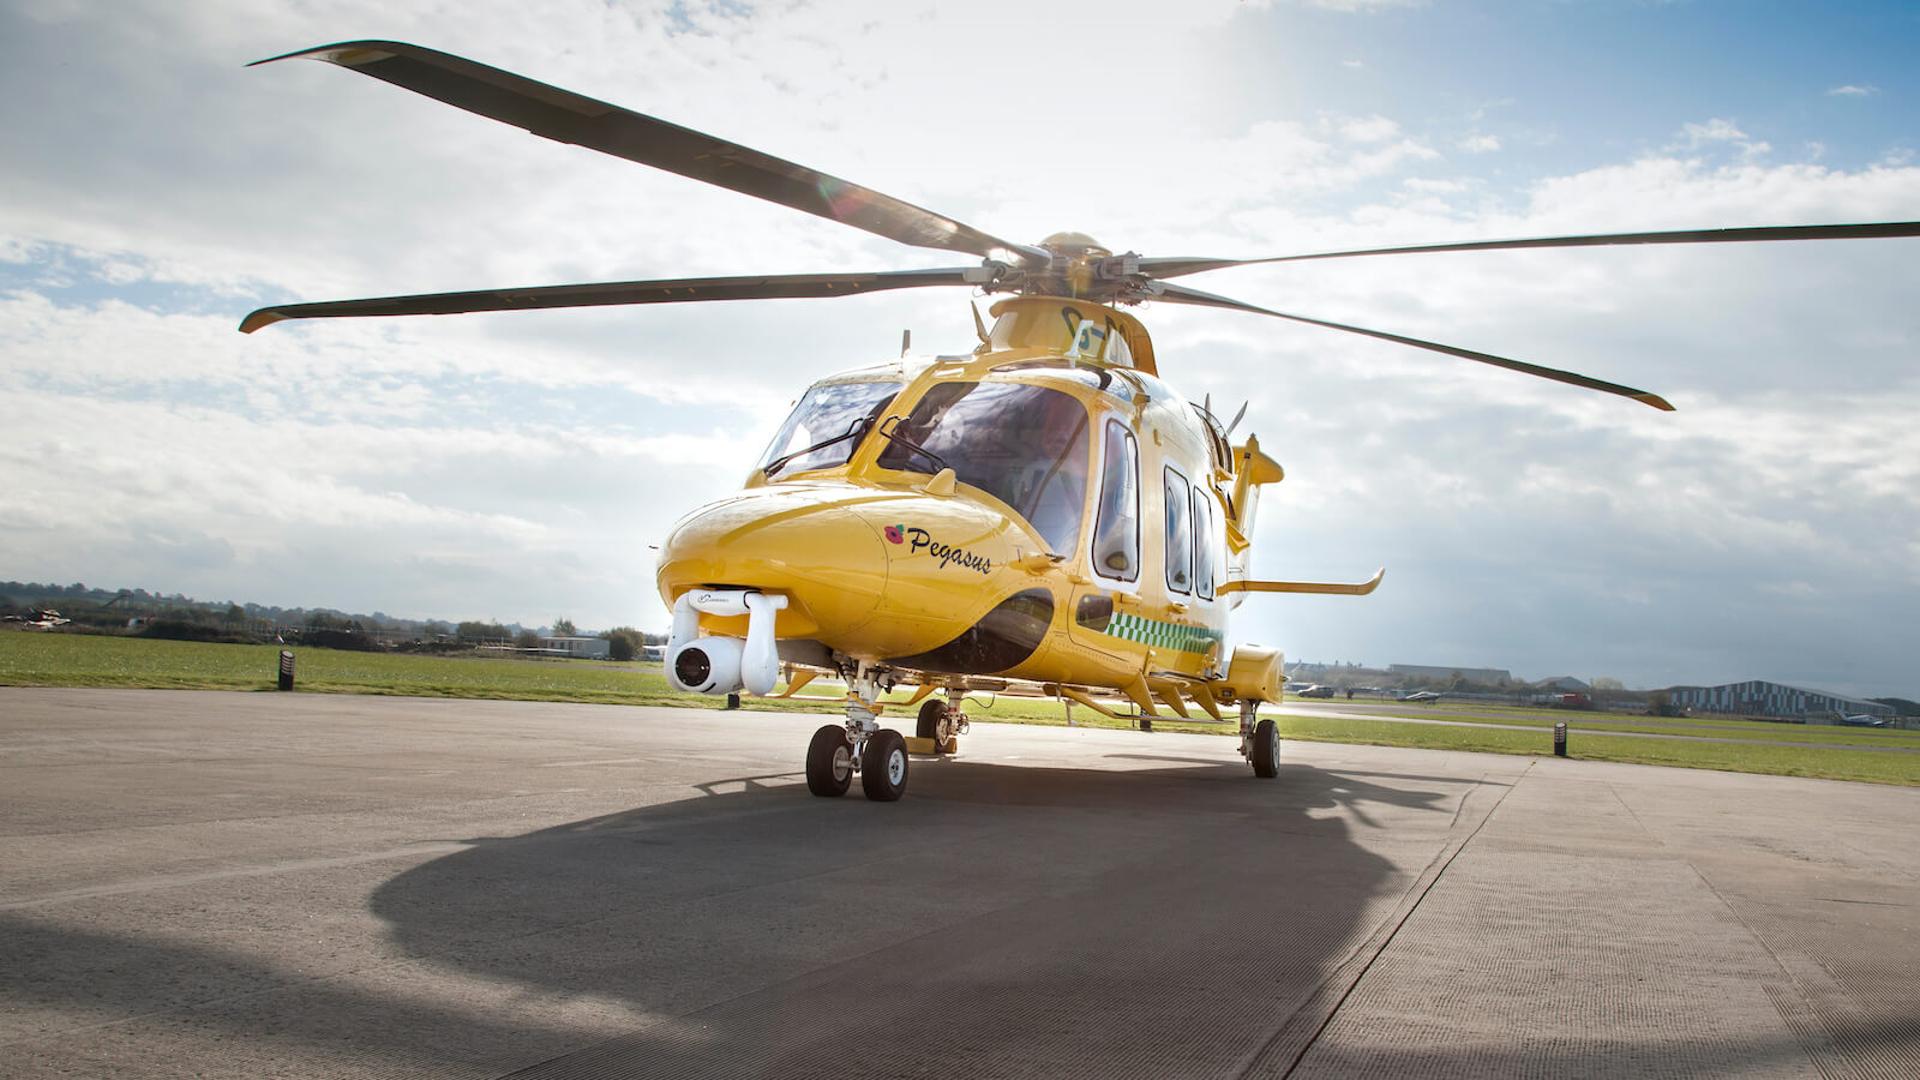 Gloucestershire air ambulance firm acquired out of administration